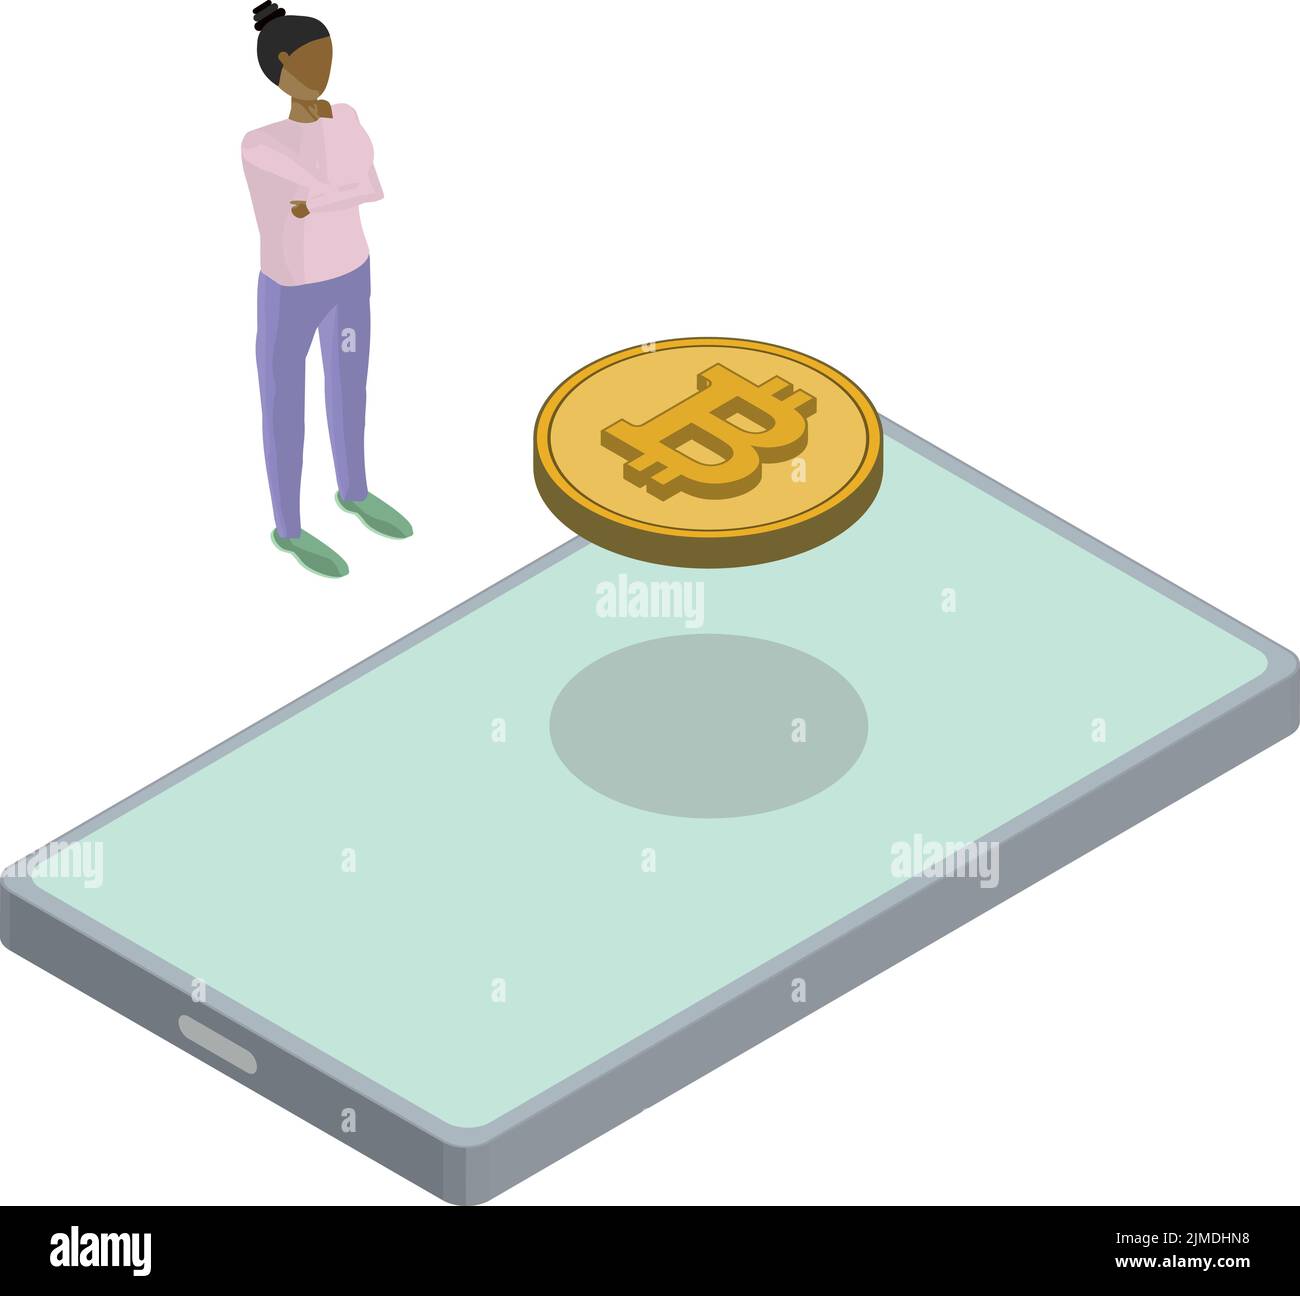 Isometric view of Phone Bitcoin Floating Back Woman Thinking Stock Vector